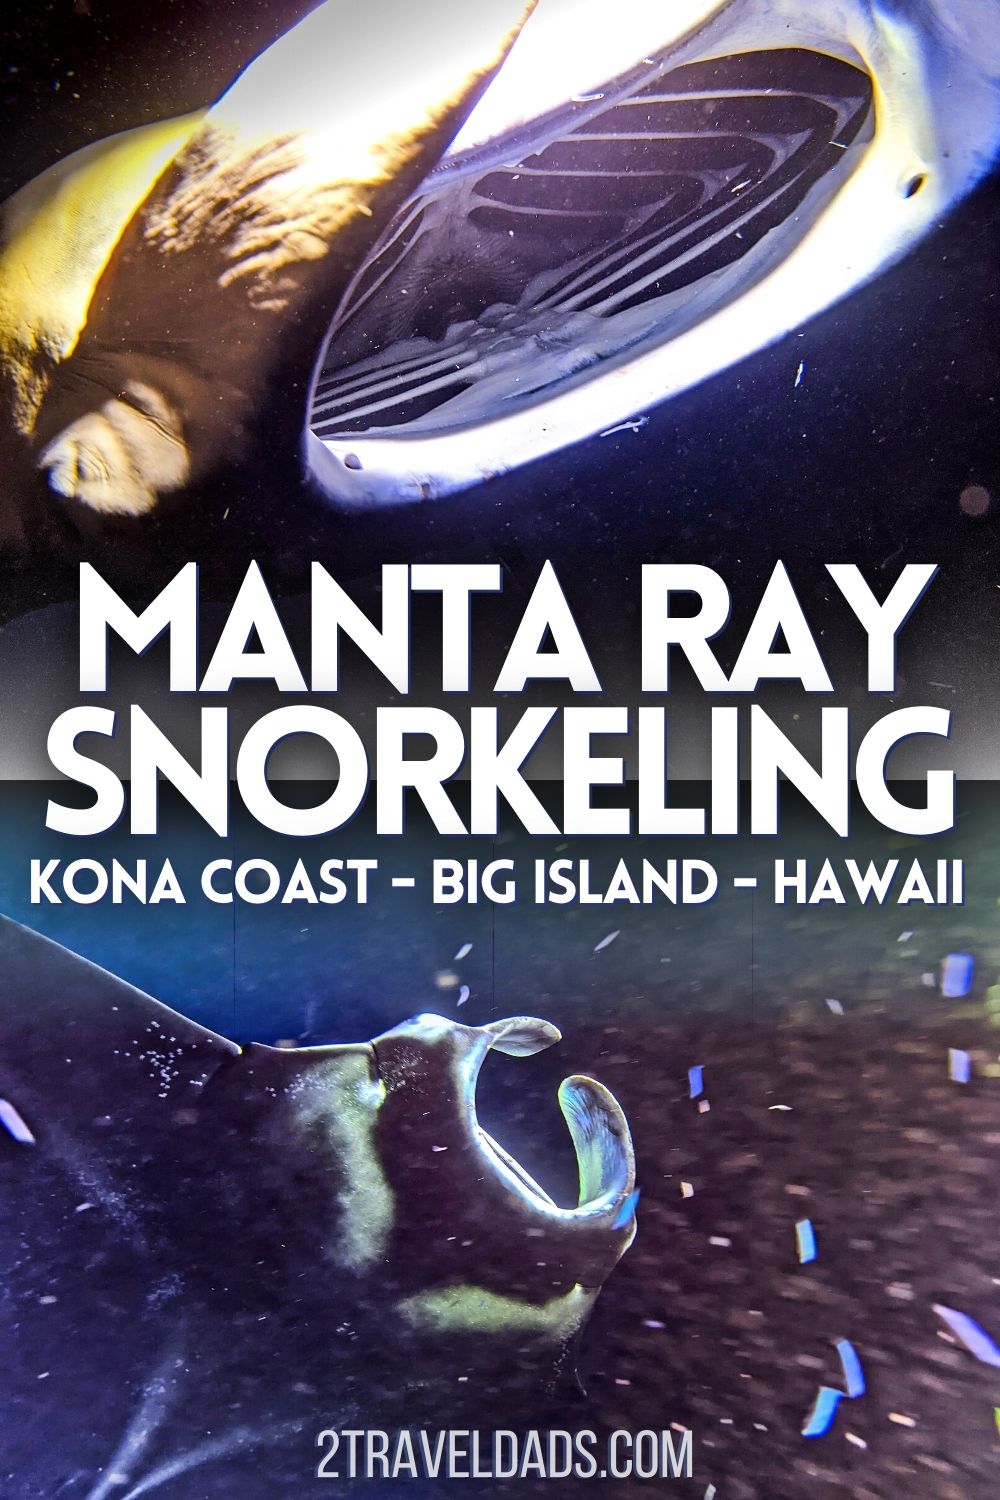 Snorkeling with manta rays off the Kona Coast on the Big Island of Hawaii is an incredible experience, but is it kid-friendly? Is it a responsible wildlife activity? From where to snorkel with manta rays in Hawaii to information about the impact on the wildlife, find out more about this unique activity, one of the most popular things to do in Hawaii.